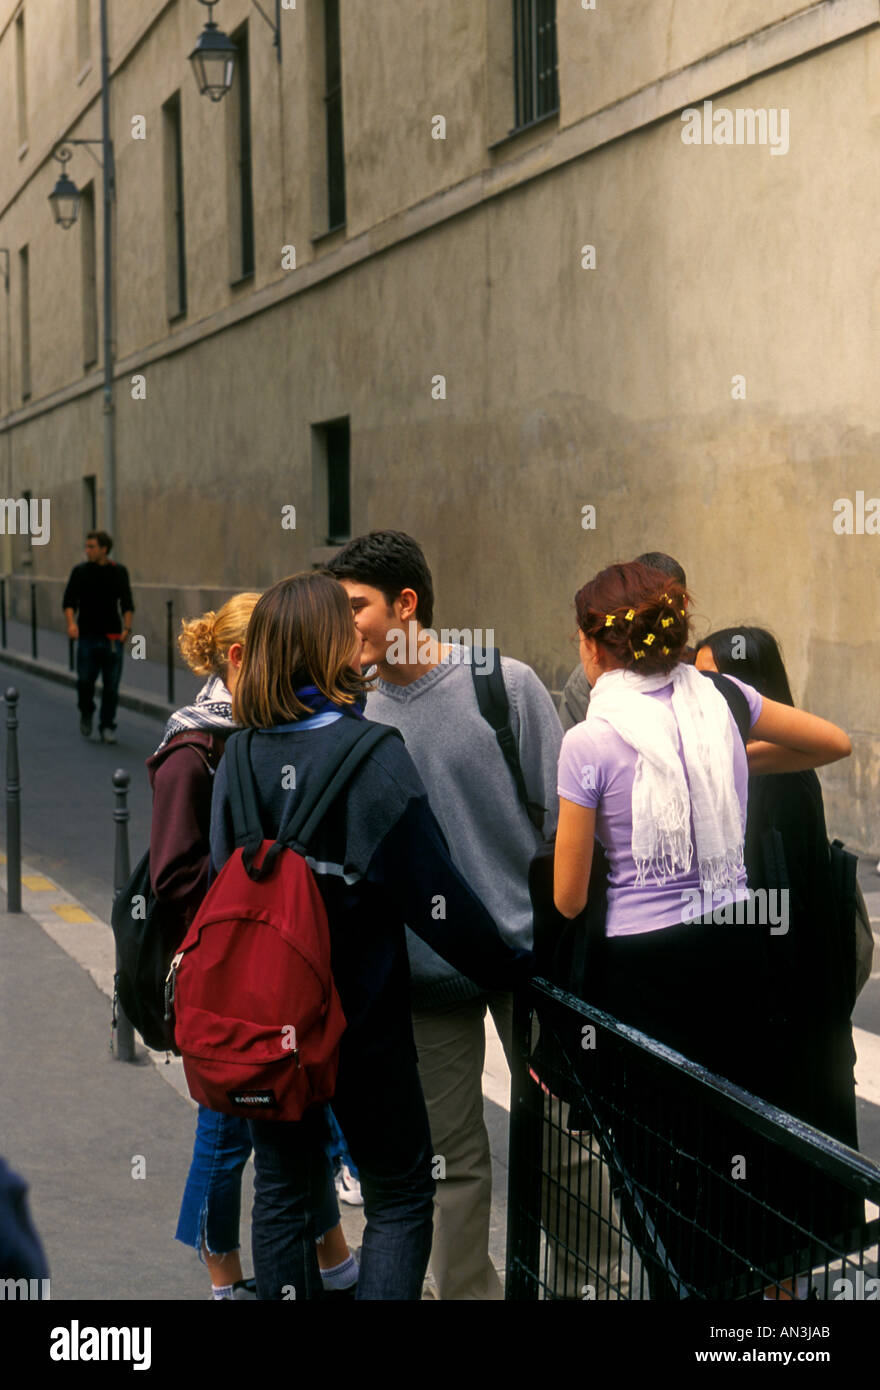 French students, French teens, French teenagers, greeting, kiss on cheek, kissing on cheek, Lycee Charlemagne, Marais District, Paris, France, Europe Stock Photo